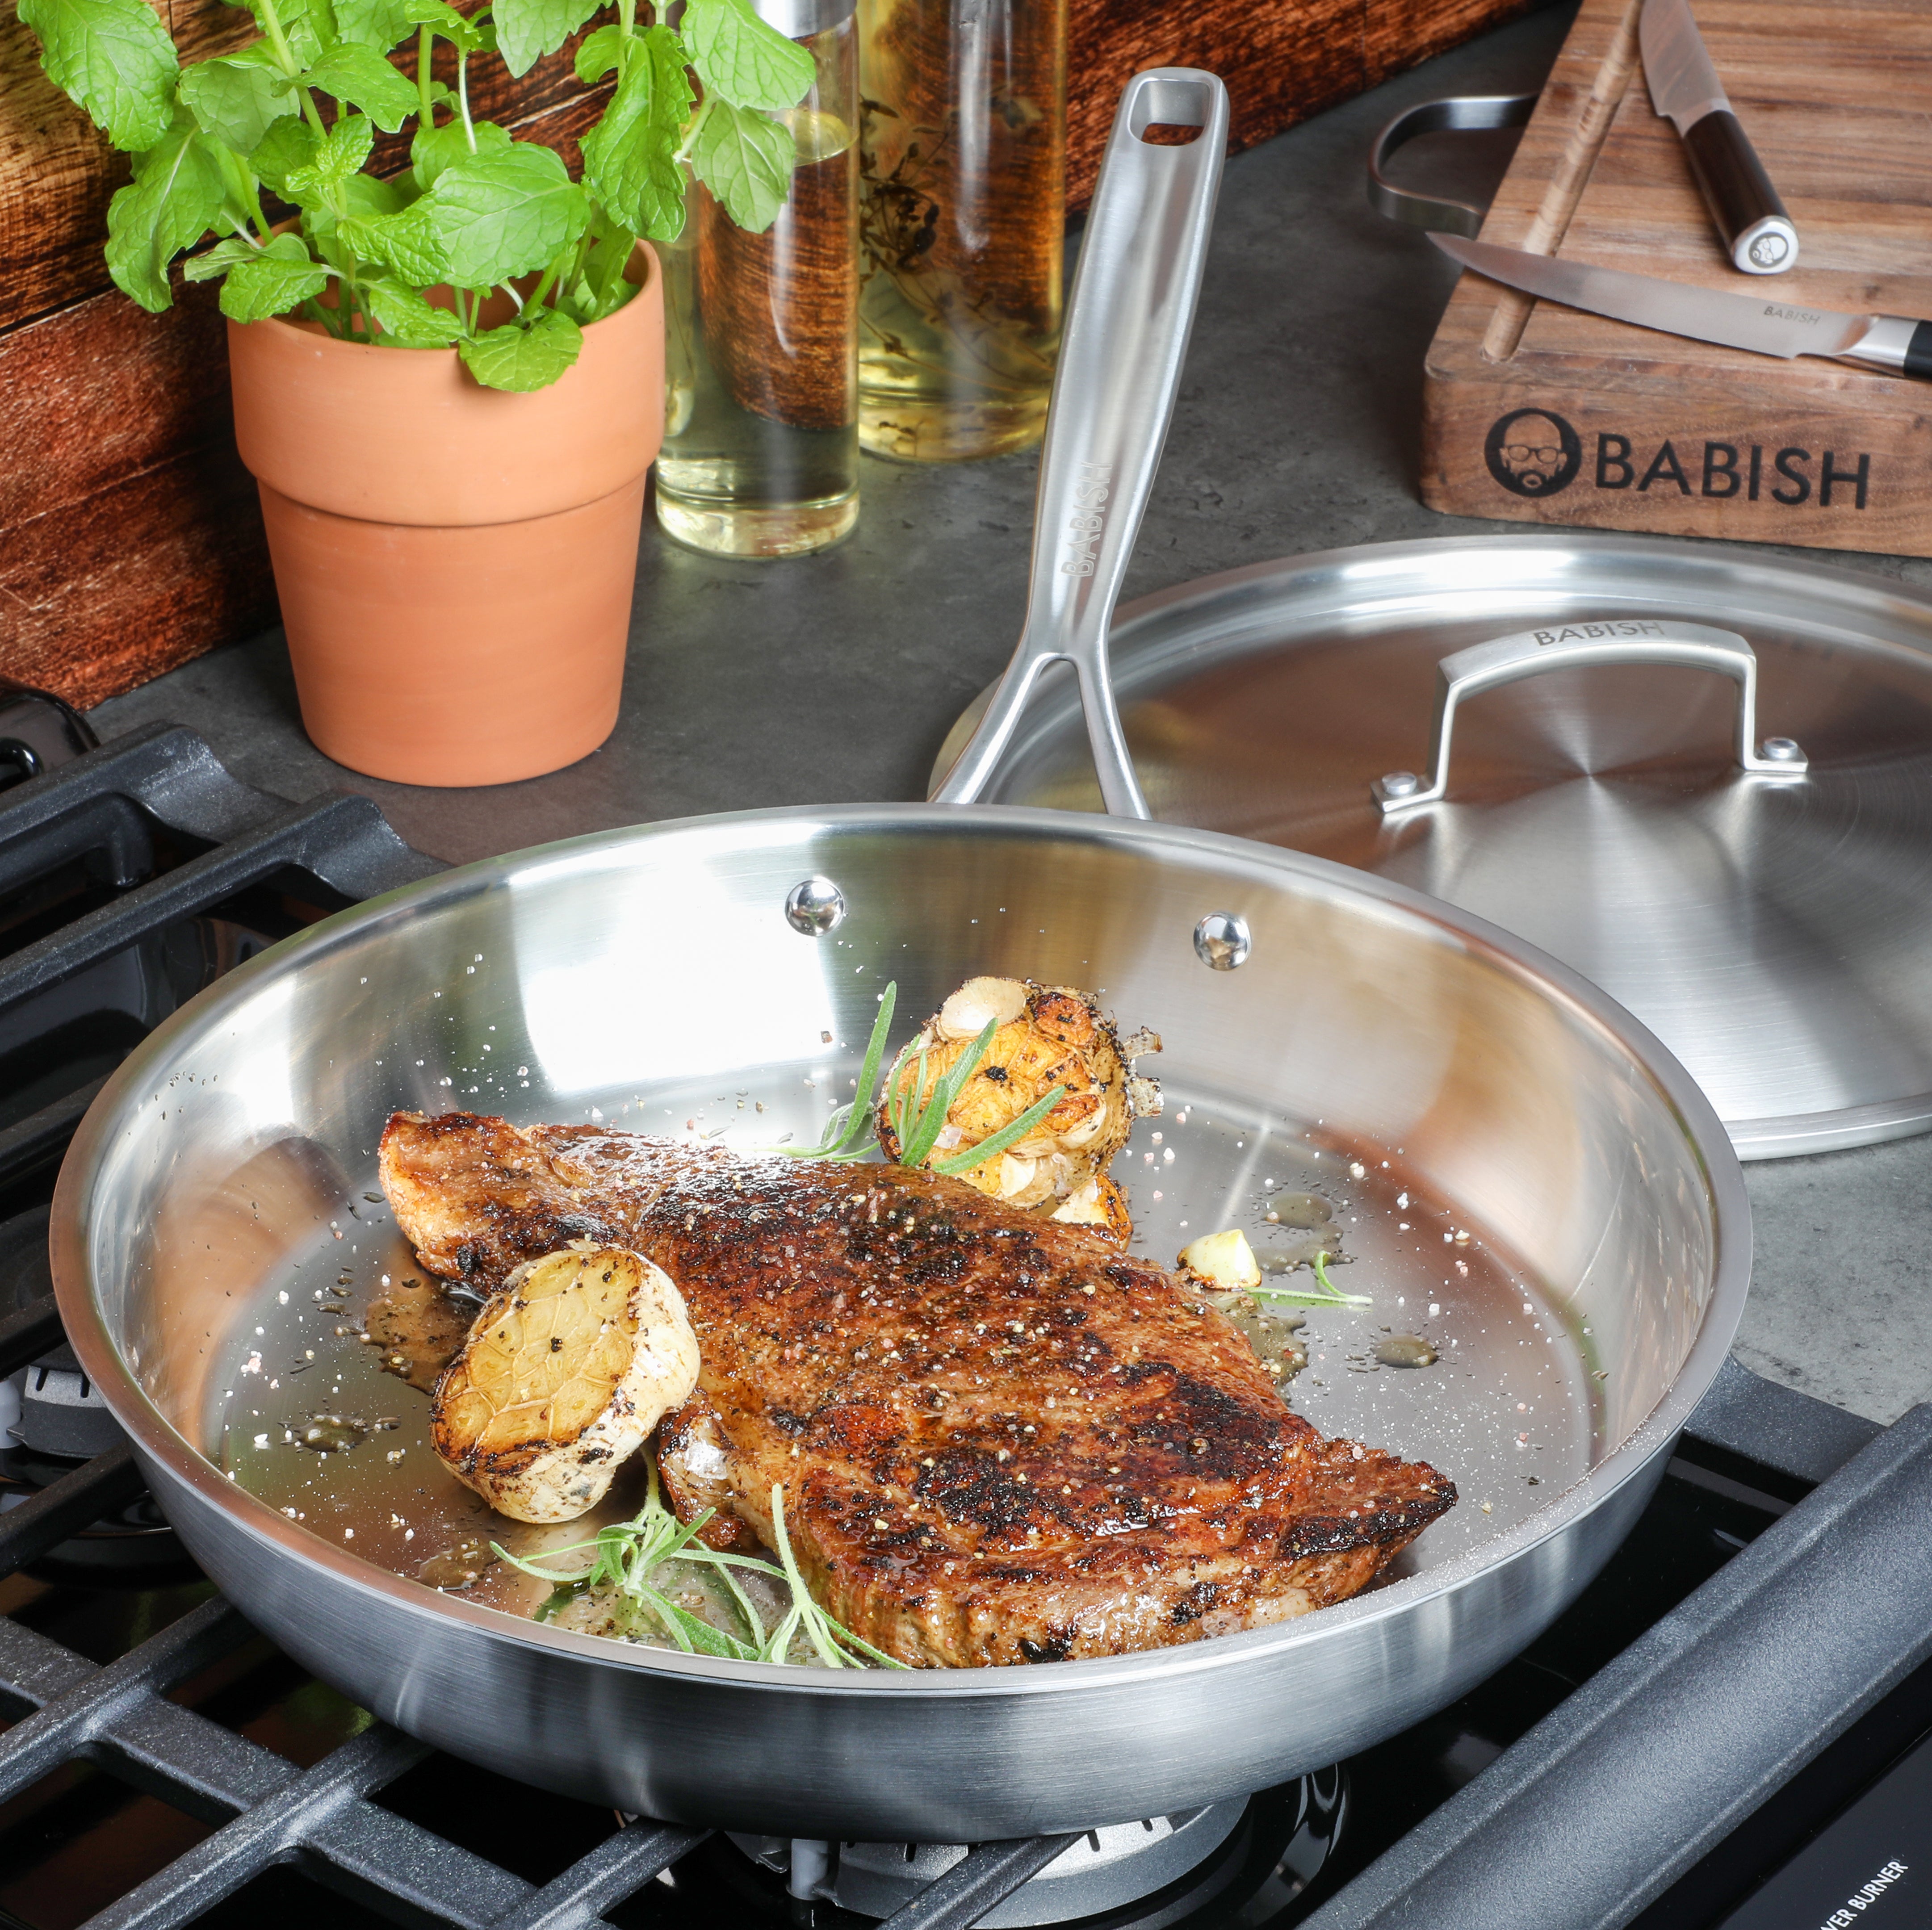 All-Clad d5 Stainless-Steel Fry Pan